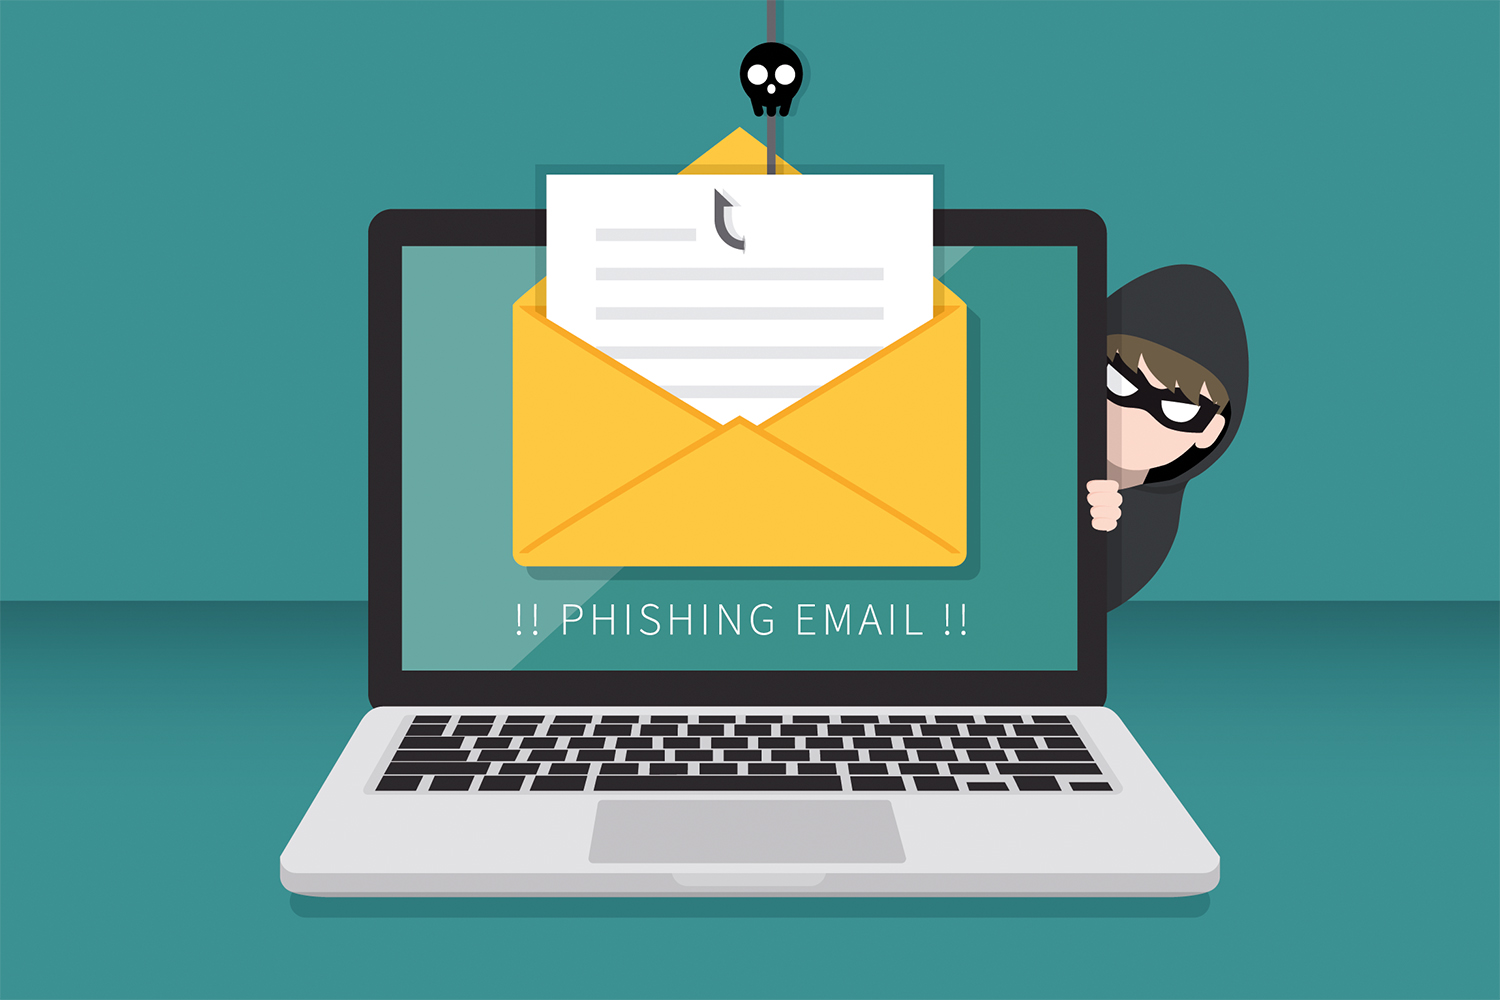 TIPS TO AVOID BECOMING A VICTIM OF MALICIOUS MAIL